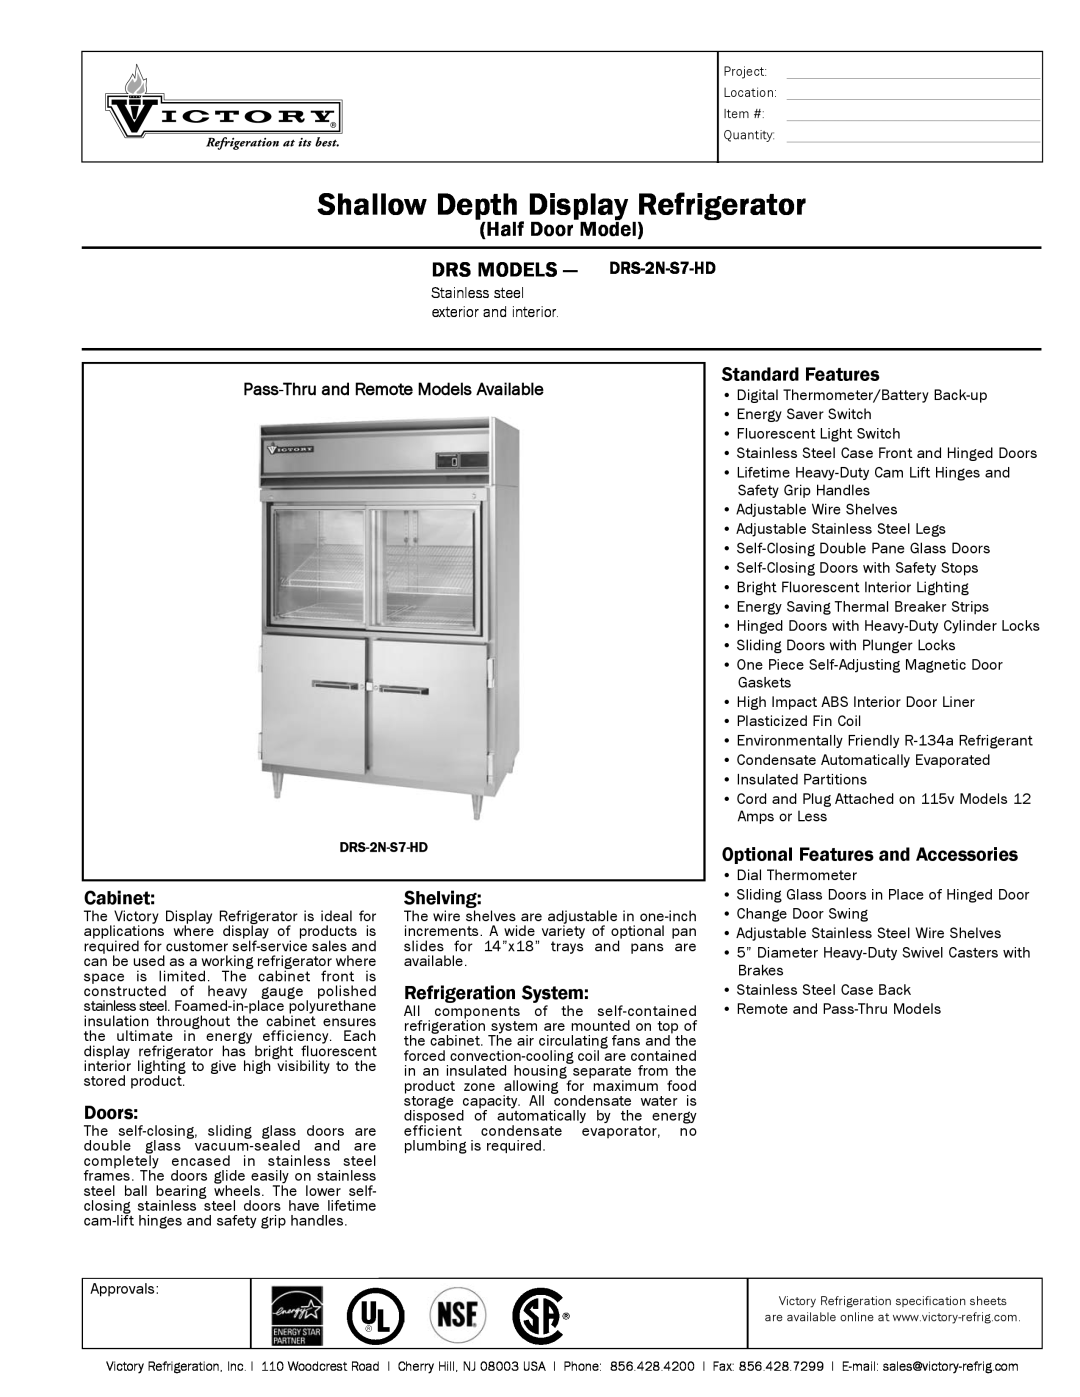 Victory Refrigeration DRS-2N-S7-HD specifications Shallow Depth Display Refrigerator, Standard Features, Cabinet, Doors 